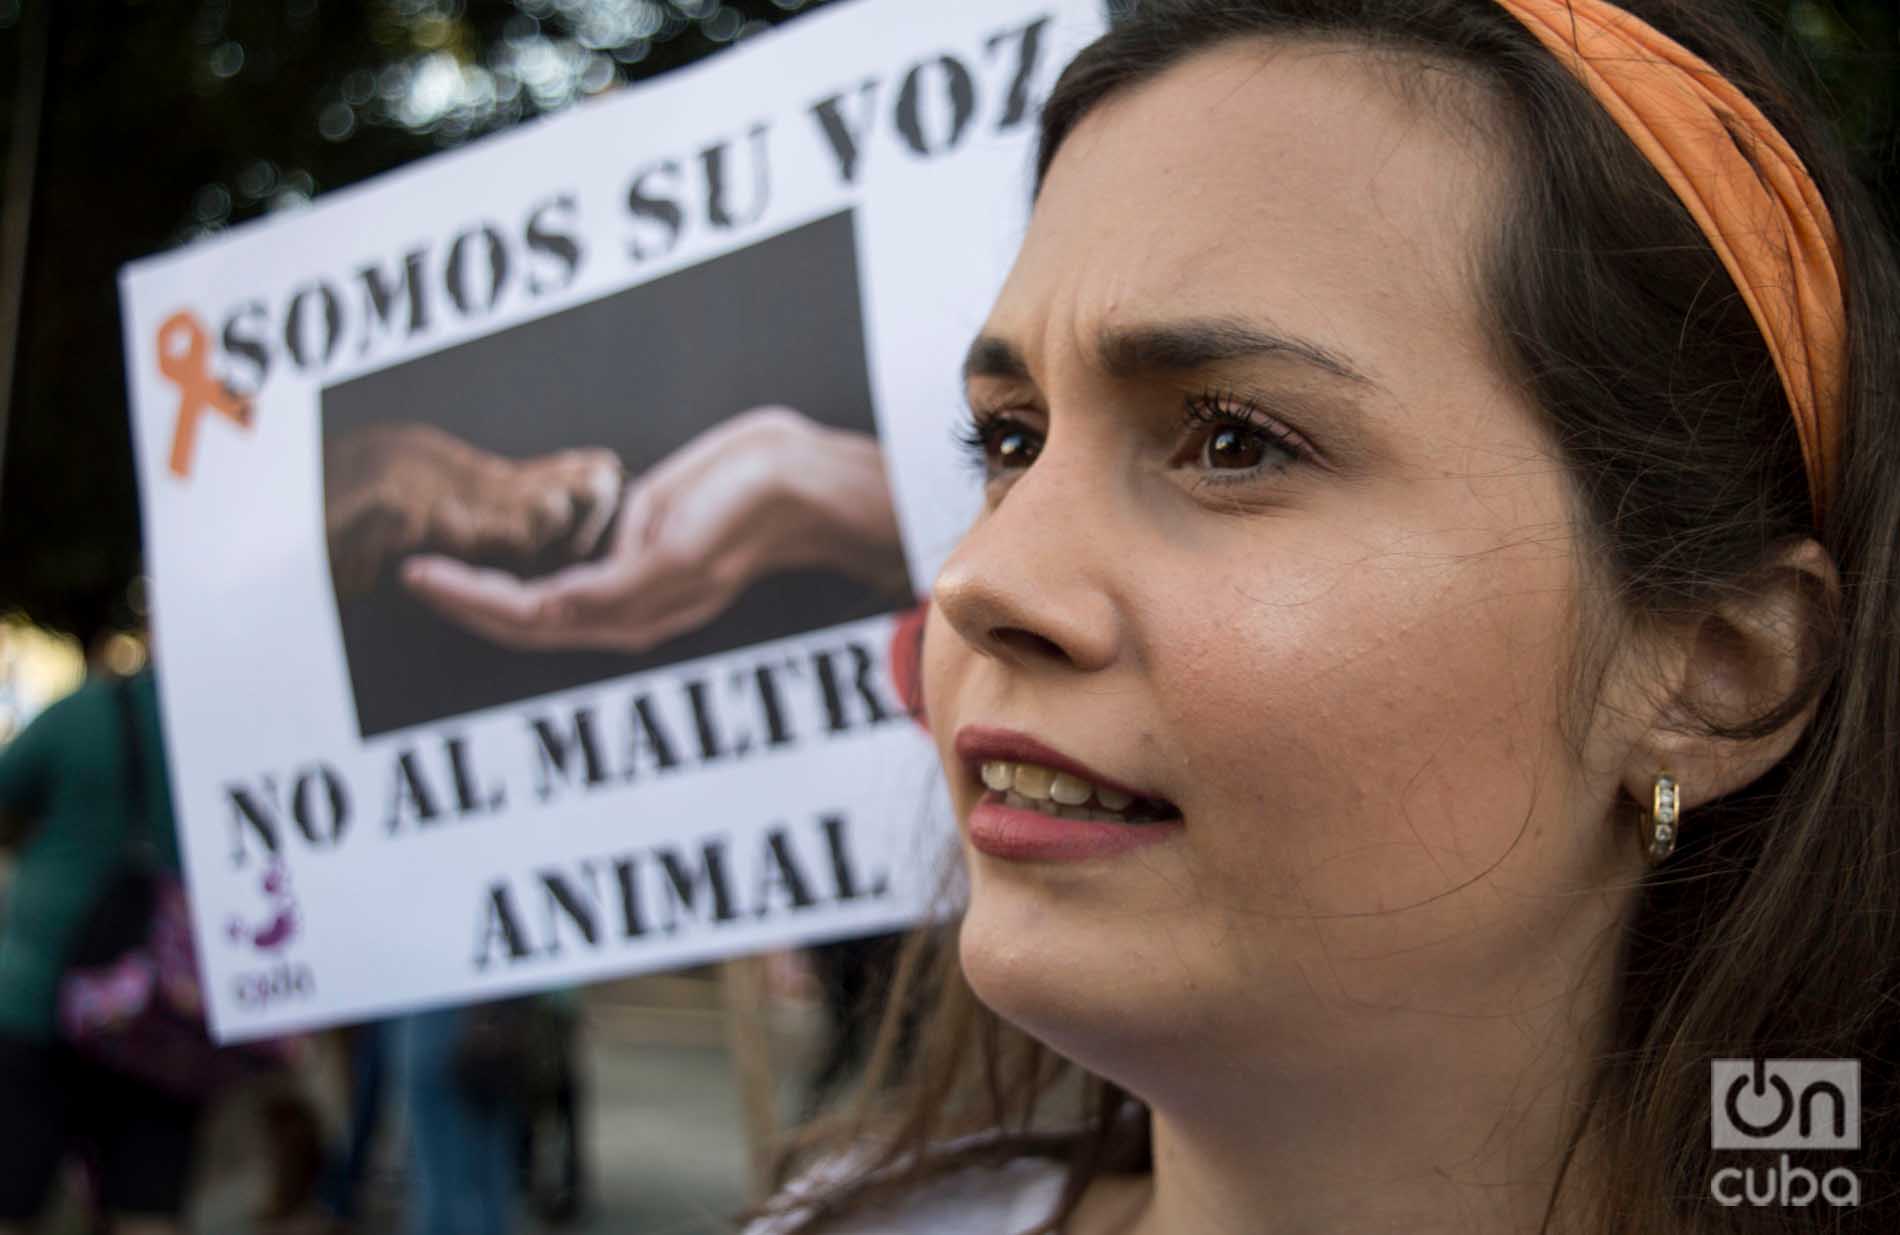 Beatriz Batista, one of the organizers of the march against animal abuse, April 7, 2019 in Havana. Photo: Otmaro Rodríguez.